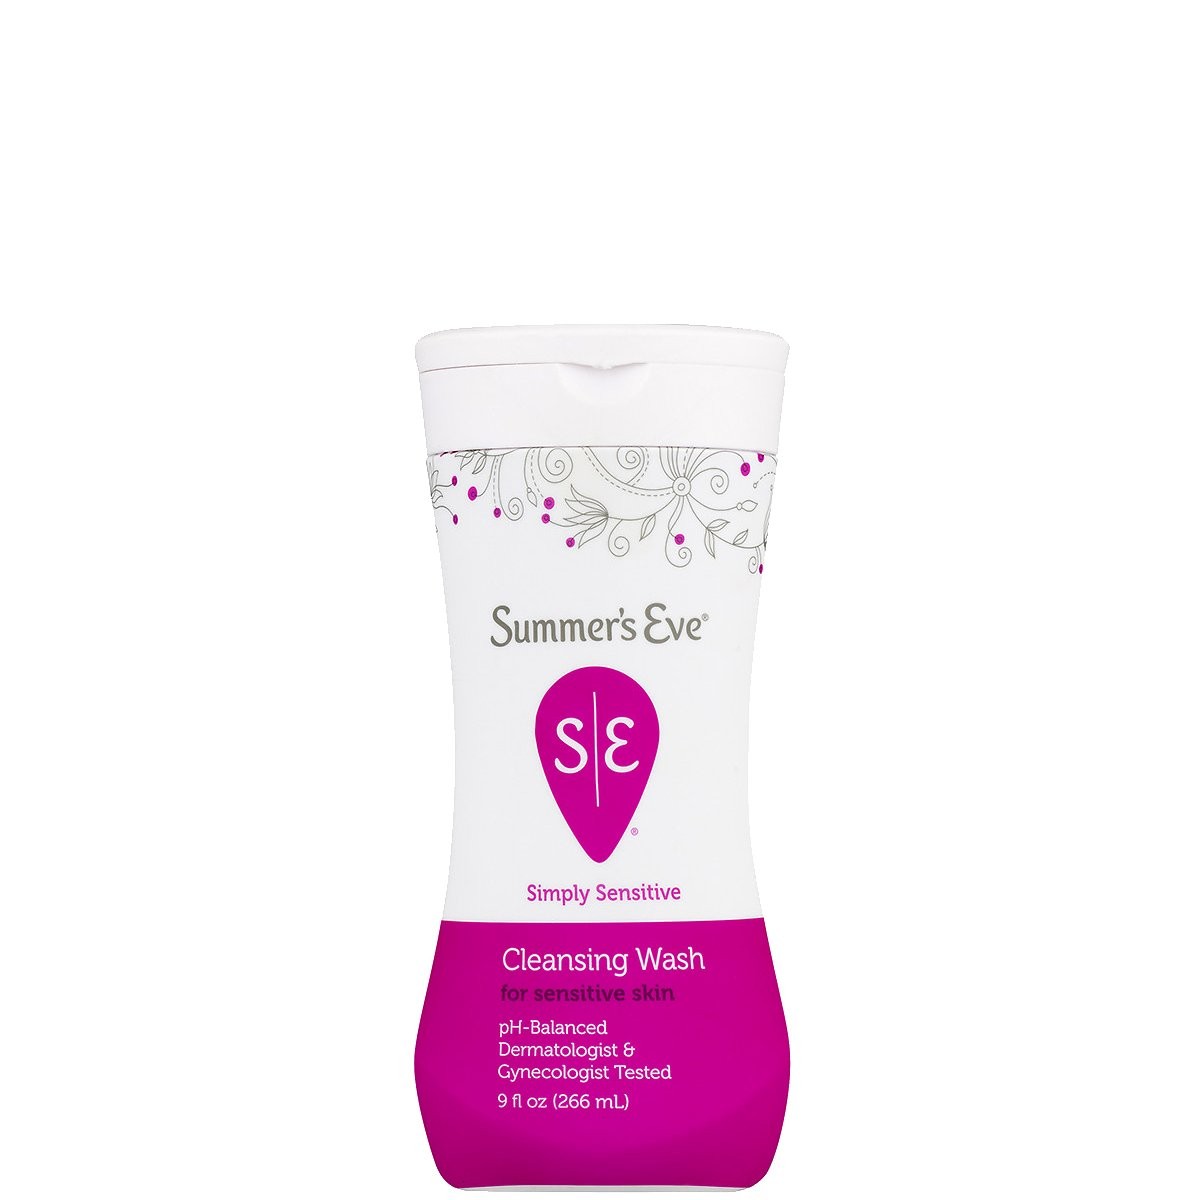 SUMMERS EVE WASH SIMPLY SENSITIVE 9oz